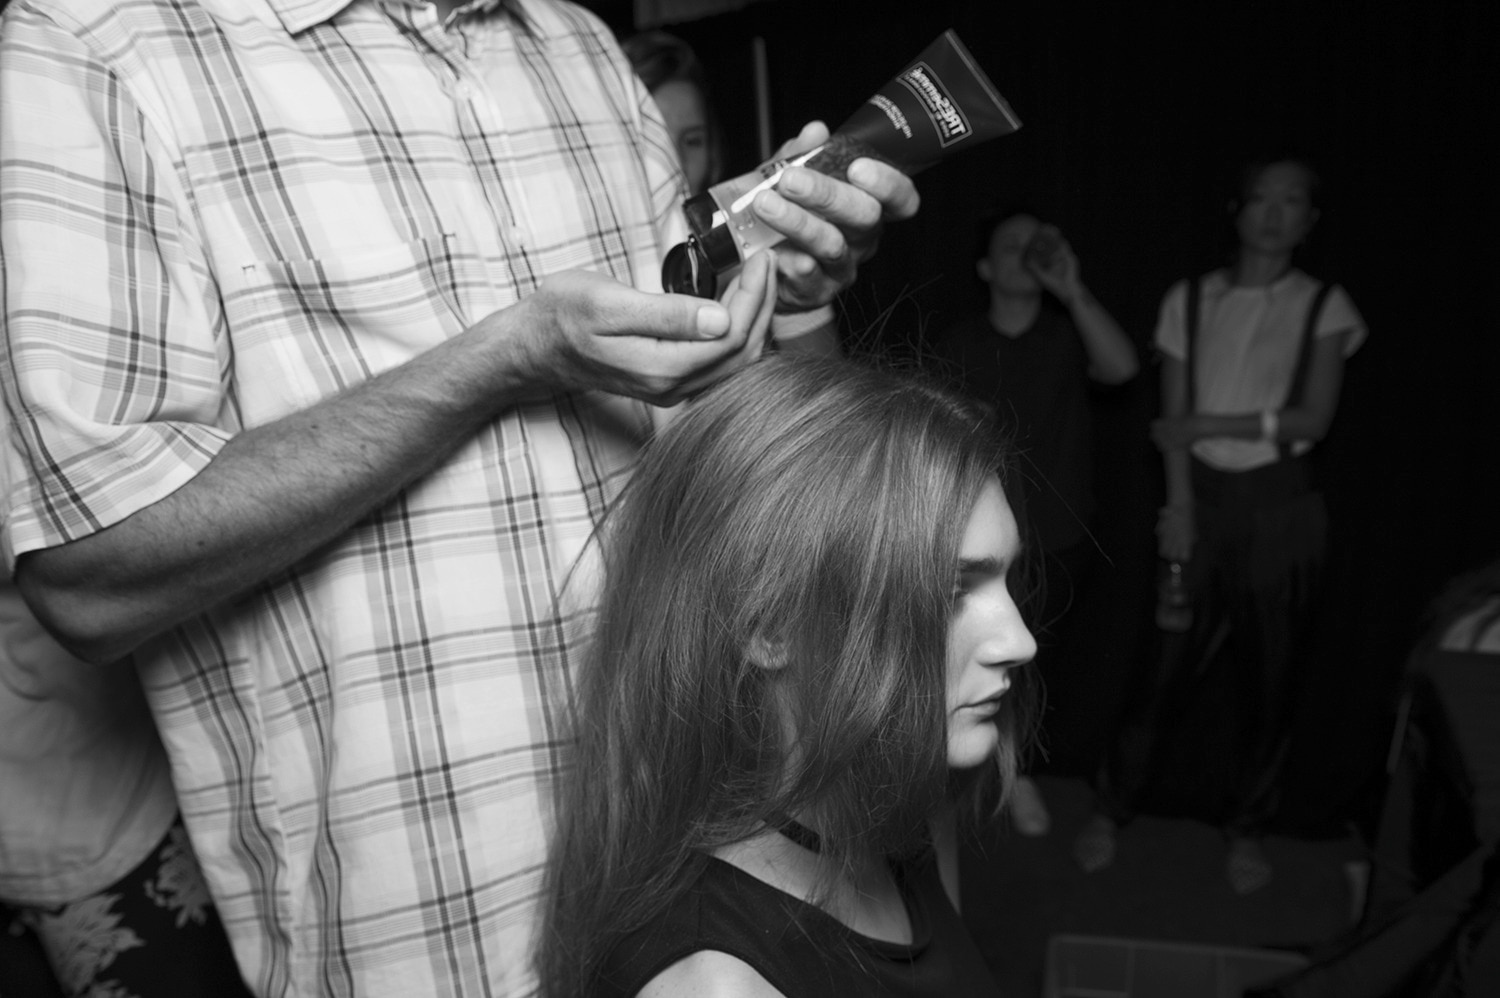 A stylist holding a tube of product and squeezing it into his hands ready to apply to a model's hair